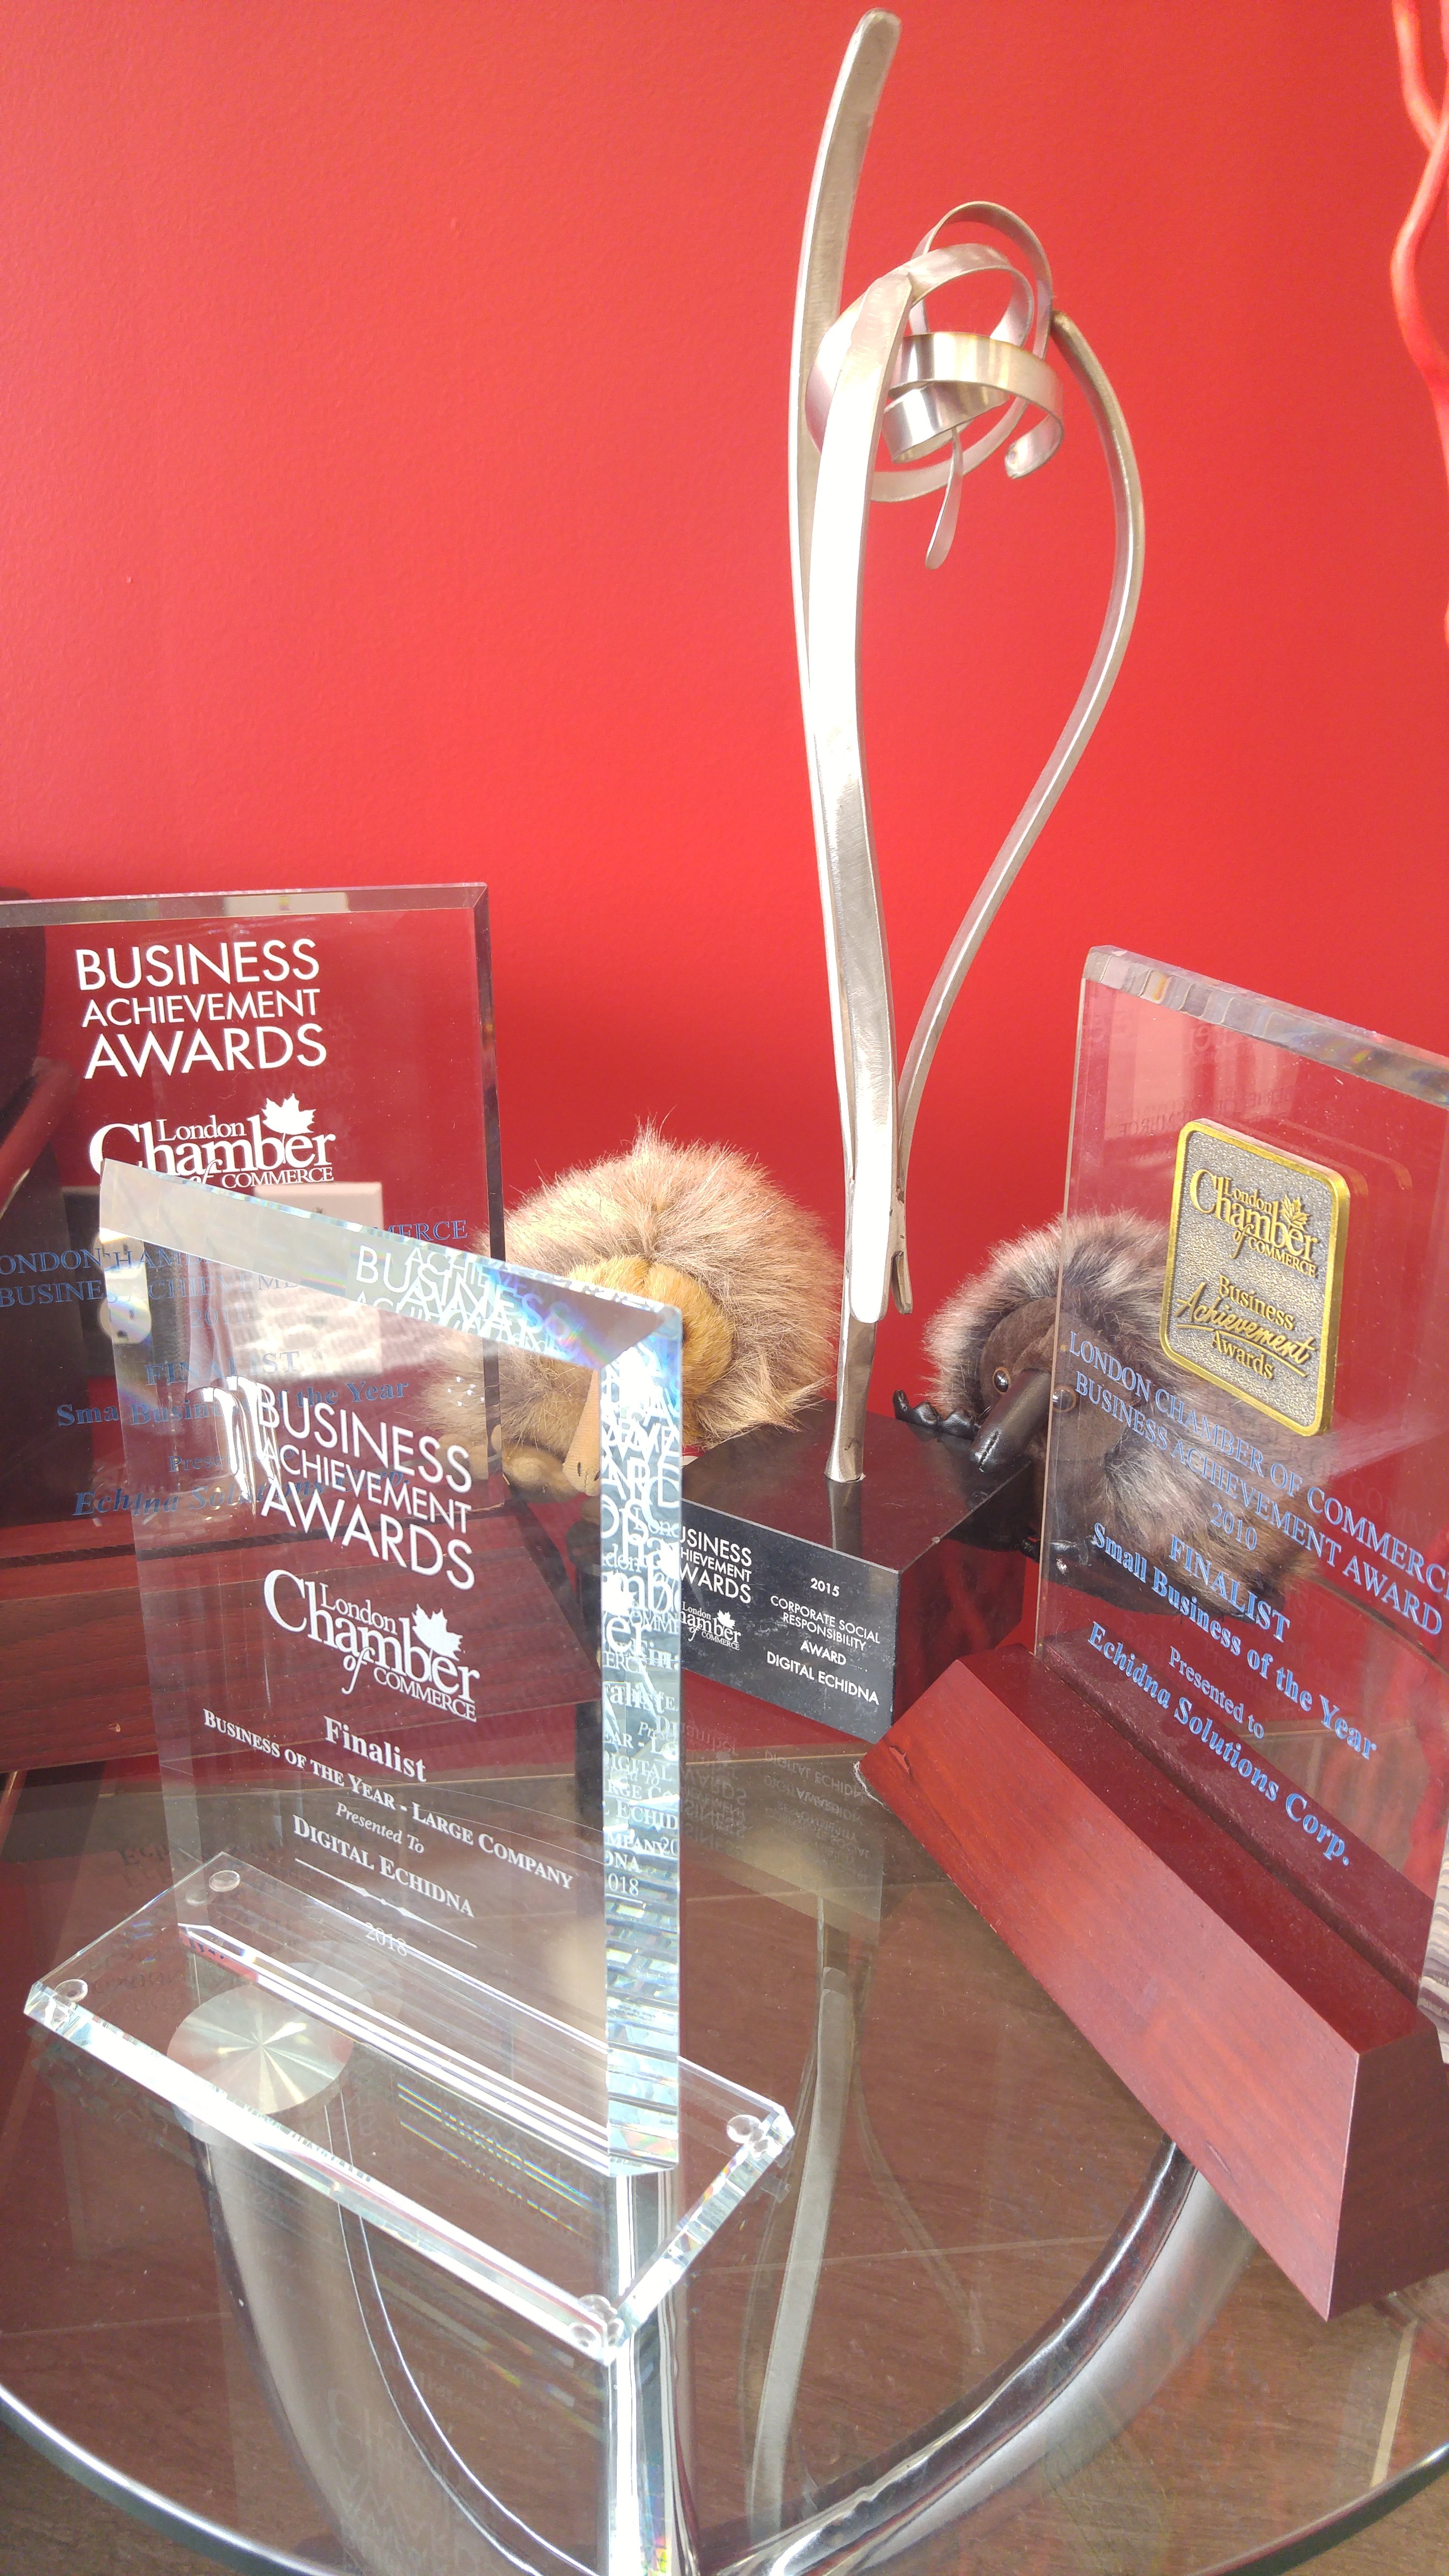 An image of the Business Achievement Awards that Digital Echidna has been nominated for and has won over the years.